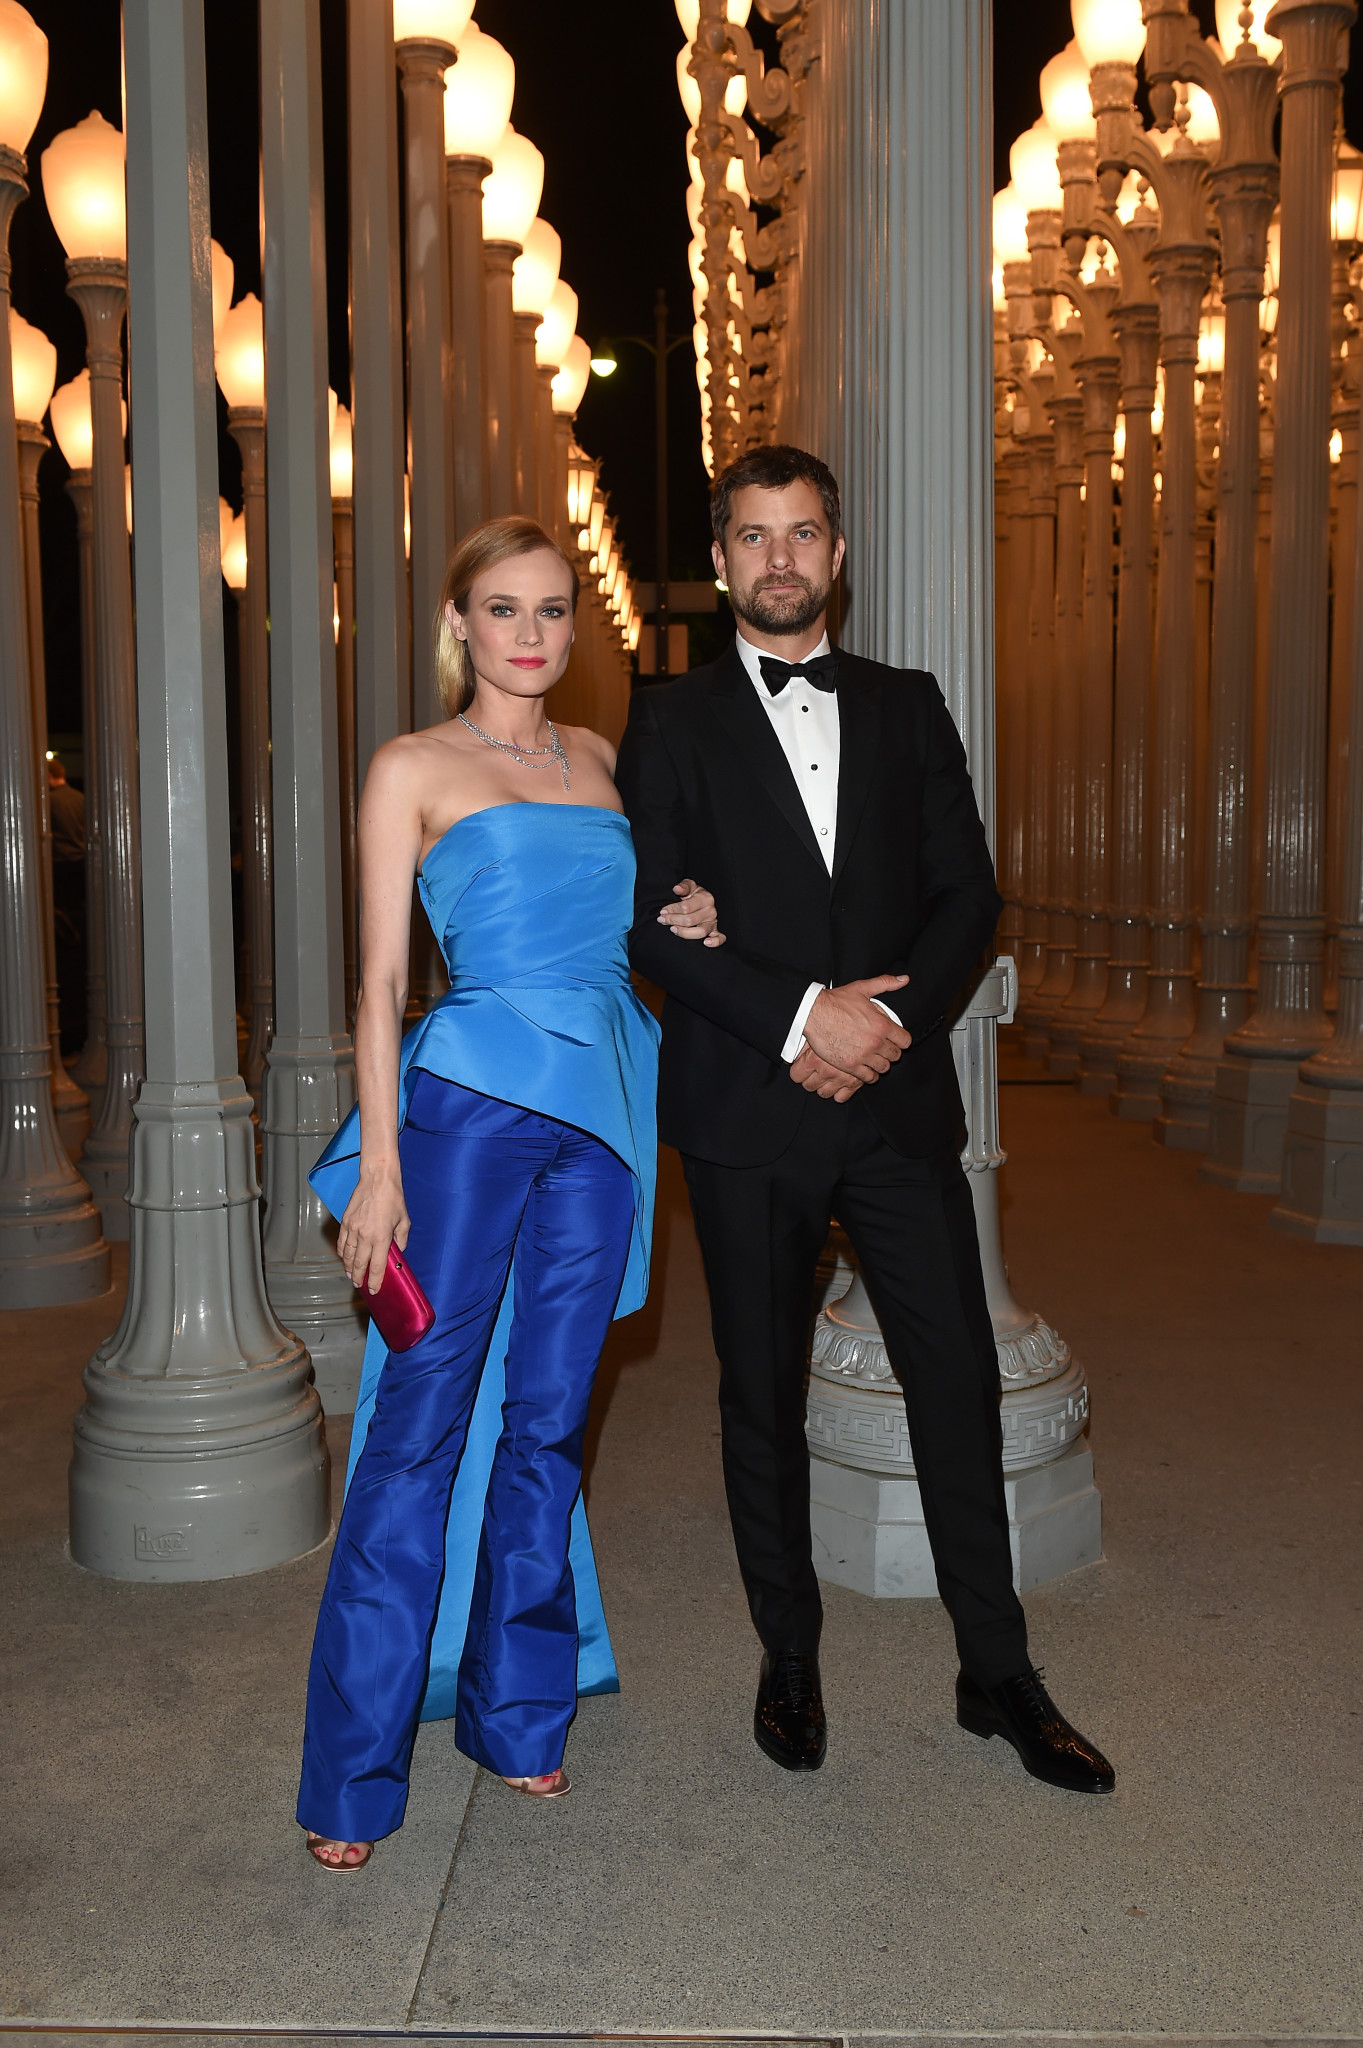 LOS ANGELES, CA - NOVEMBER 07: Actors Diane Kruger (L) and Joshua Jackson attend LACMA 2015 Art+Film Gala Honoring James Turrell and Alejandro G Iñárritu, Presented by Gucci at LACMA on November 7, 2015 in Los Angeles, California.  (Photo by Venturelli/Getty Images For LACMA) *** Local Caption *** Diane Kruger;Joshua Jackson